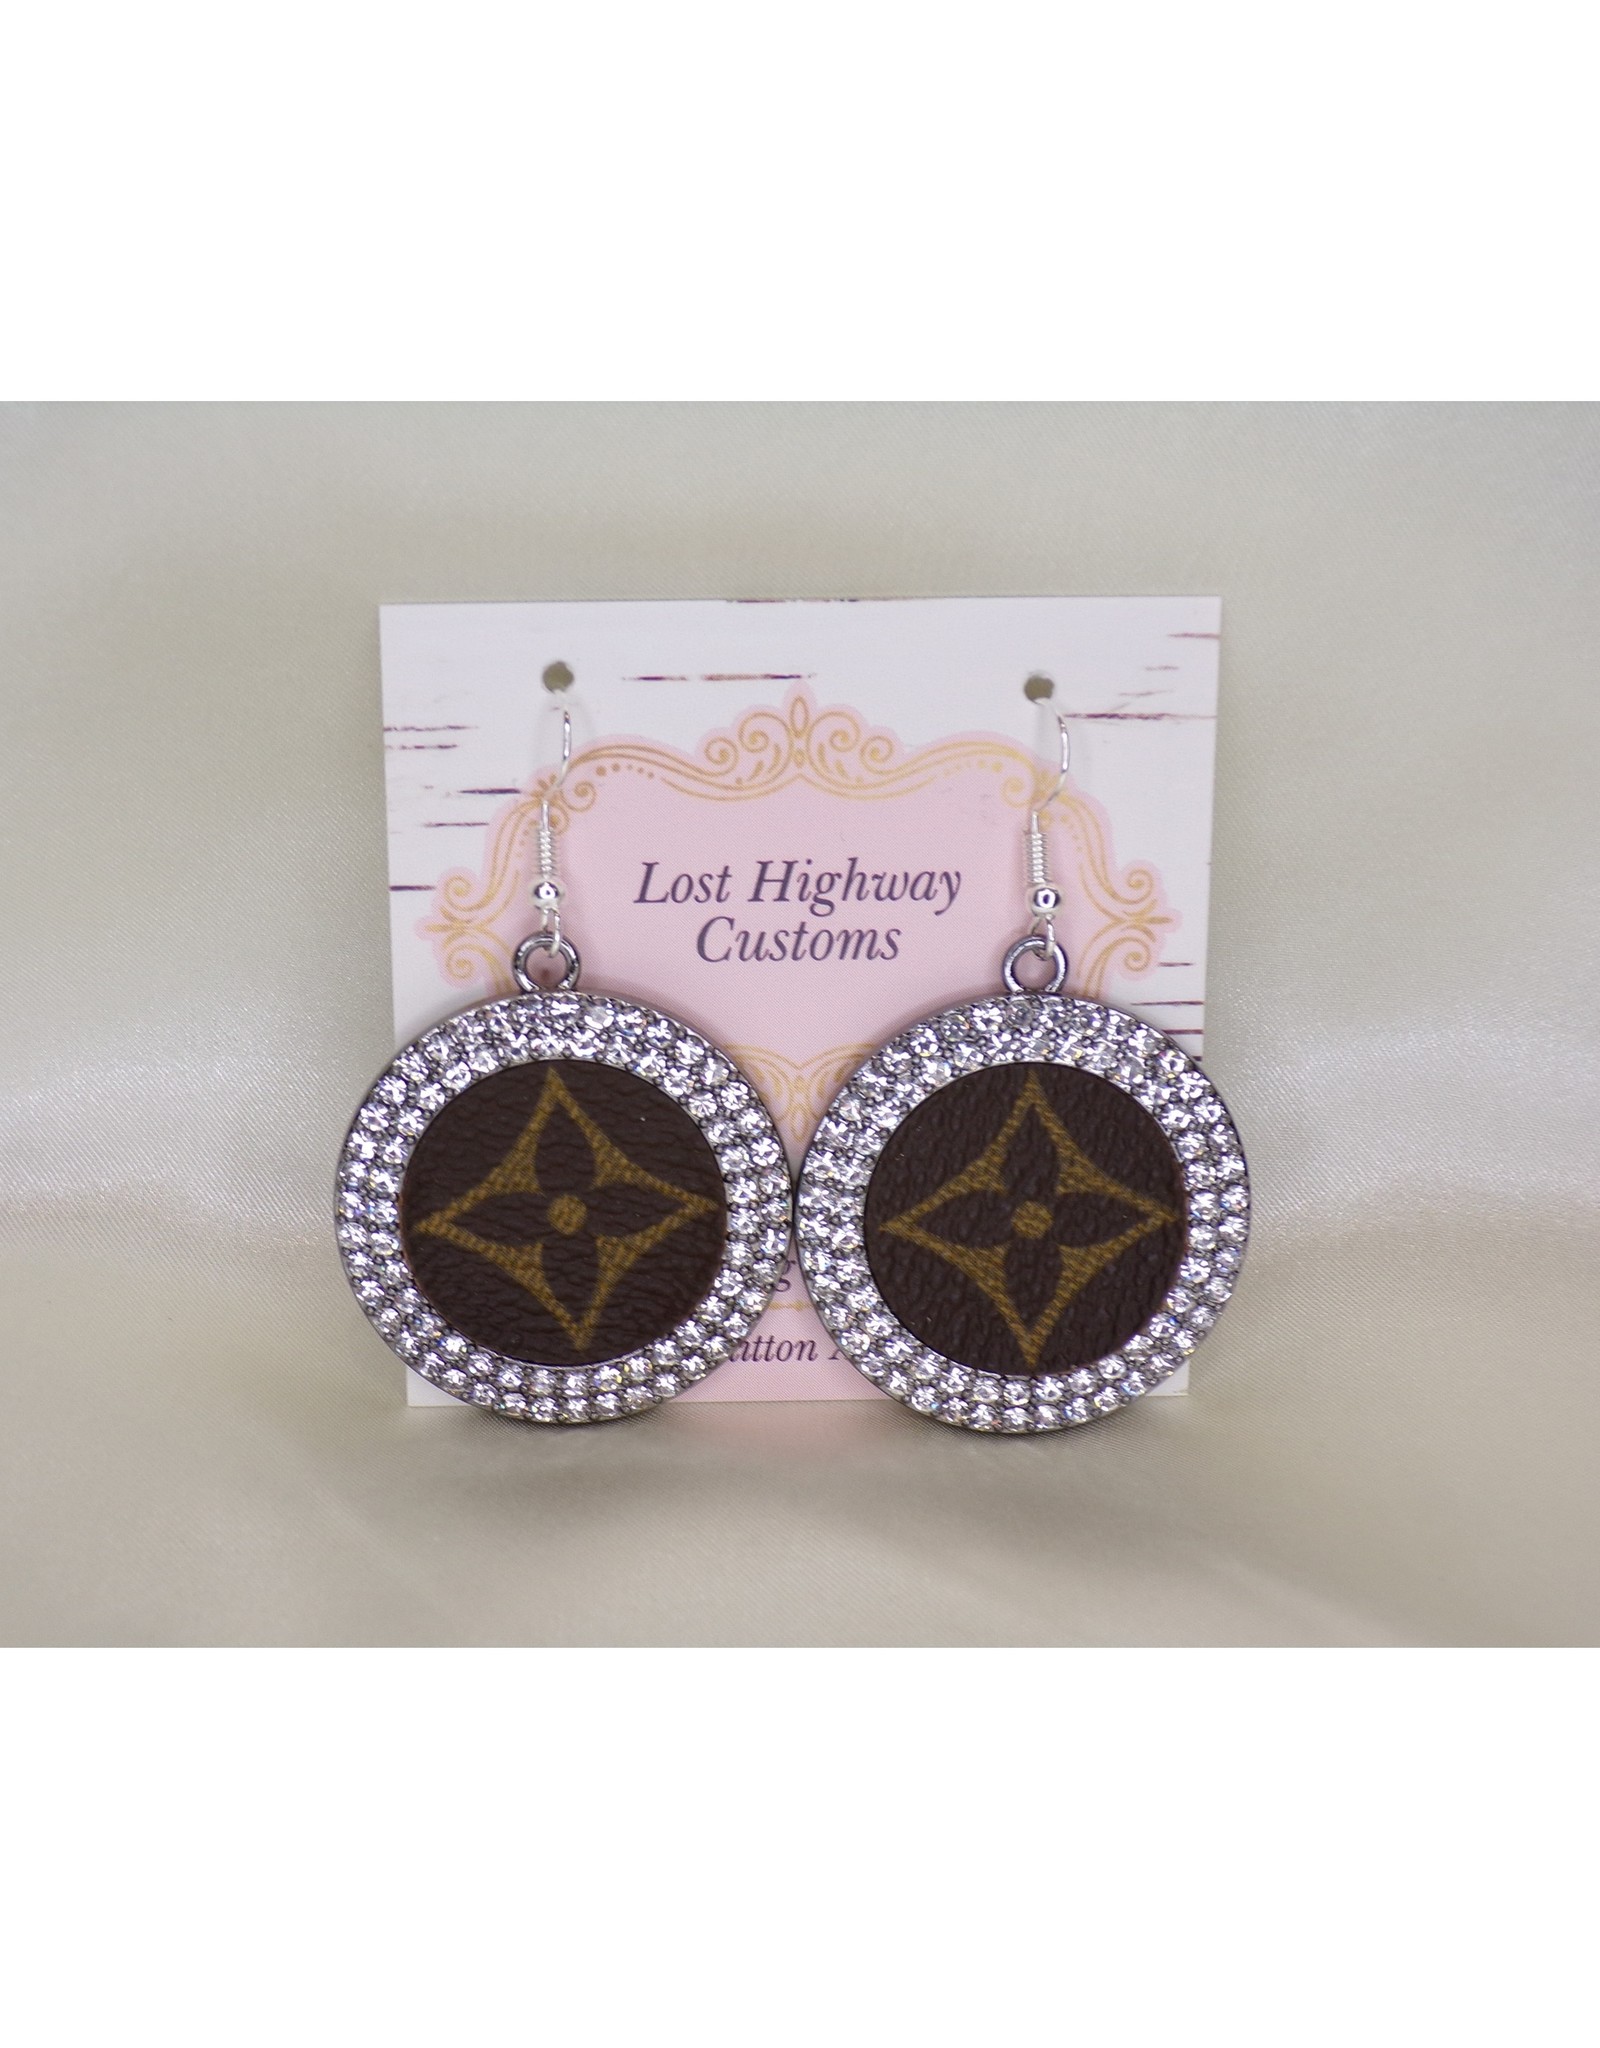 Lost Highway Customs Louis Vuitton Upcycled Earrings